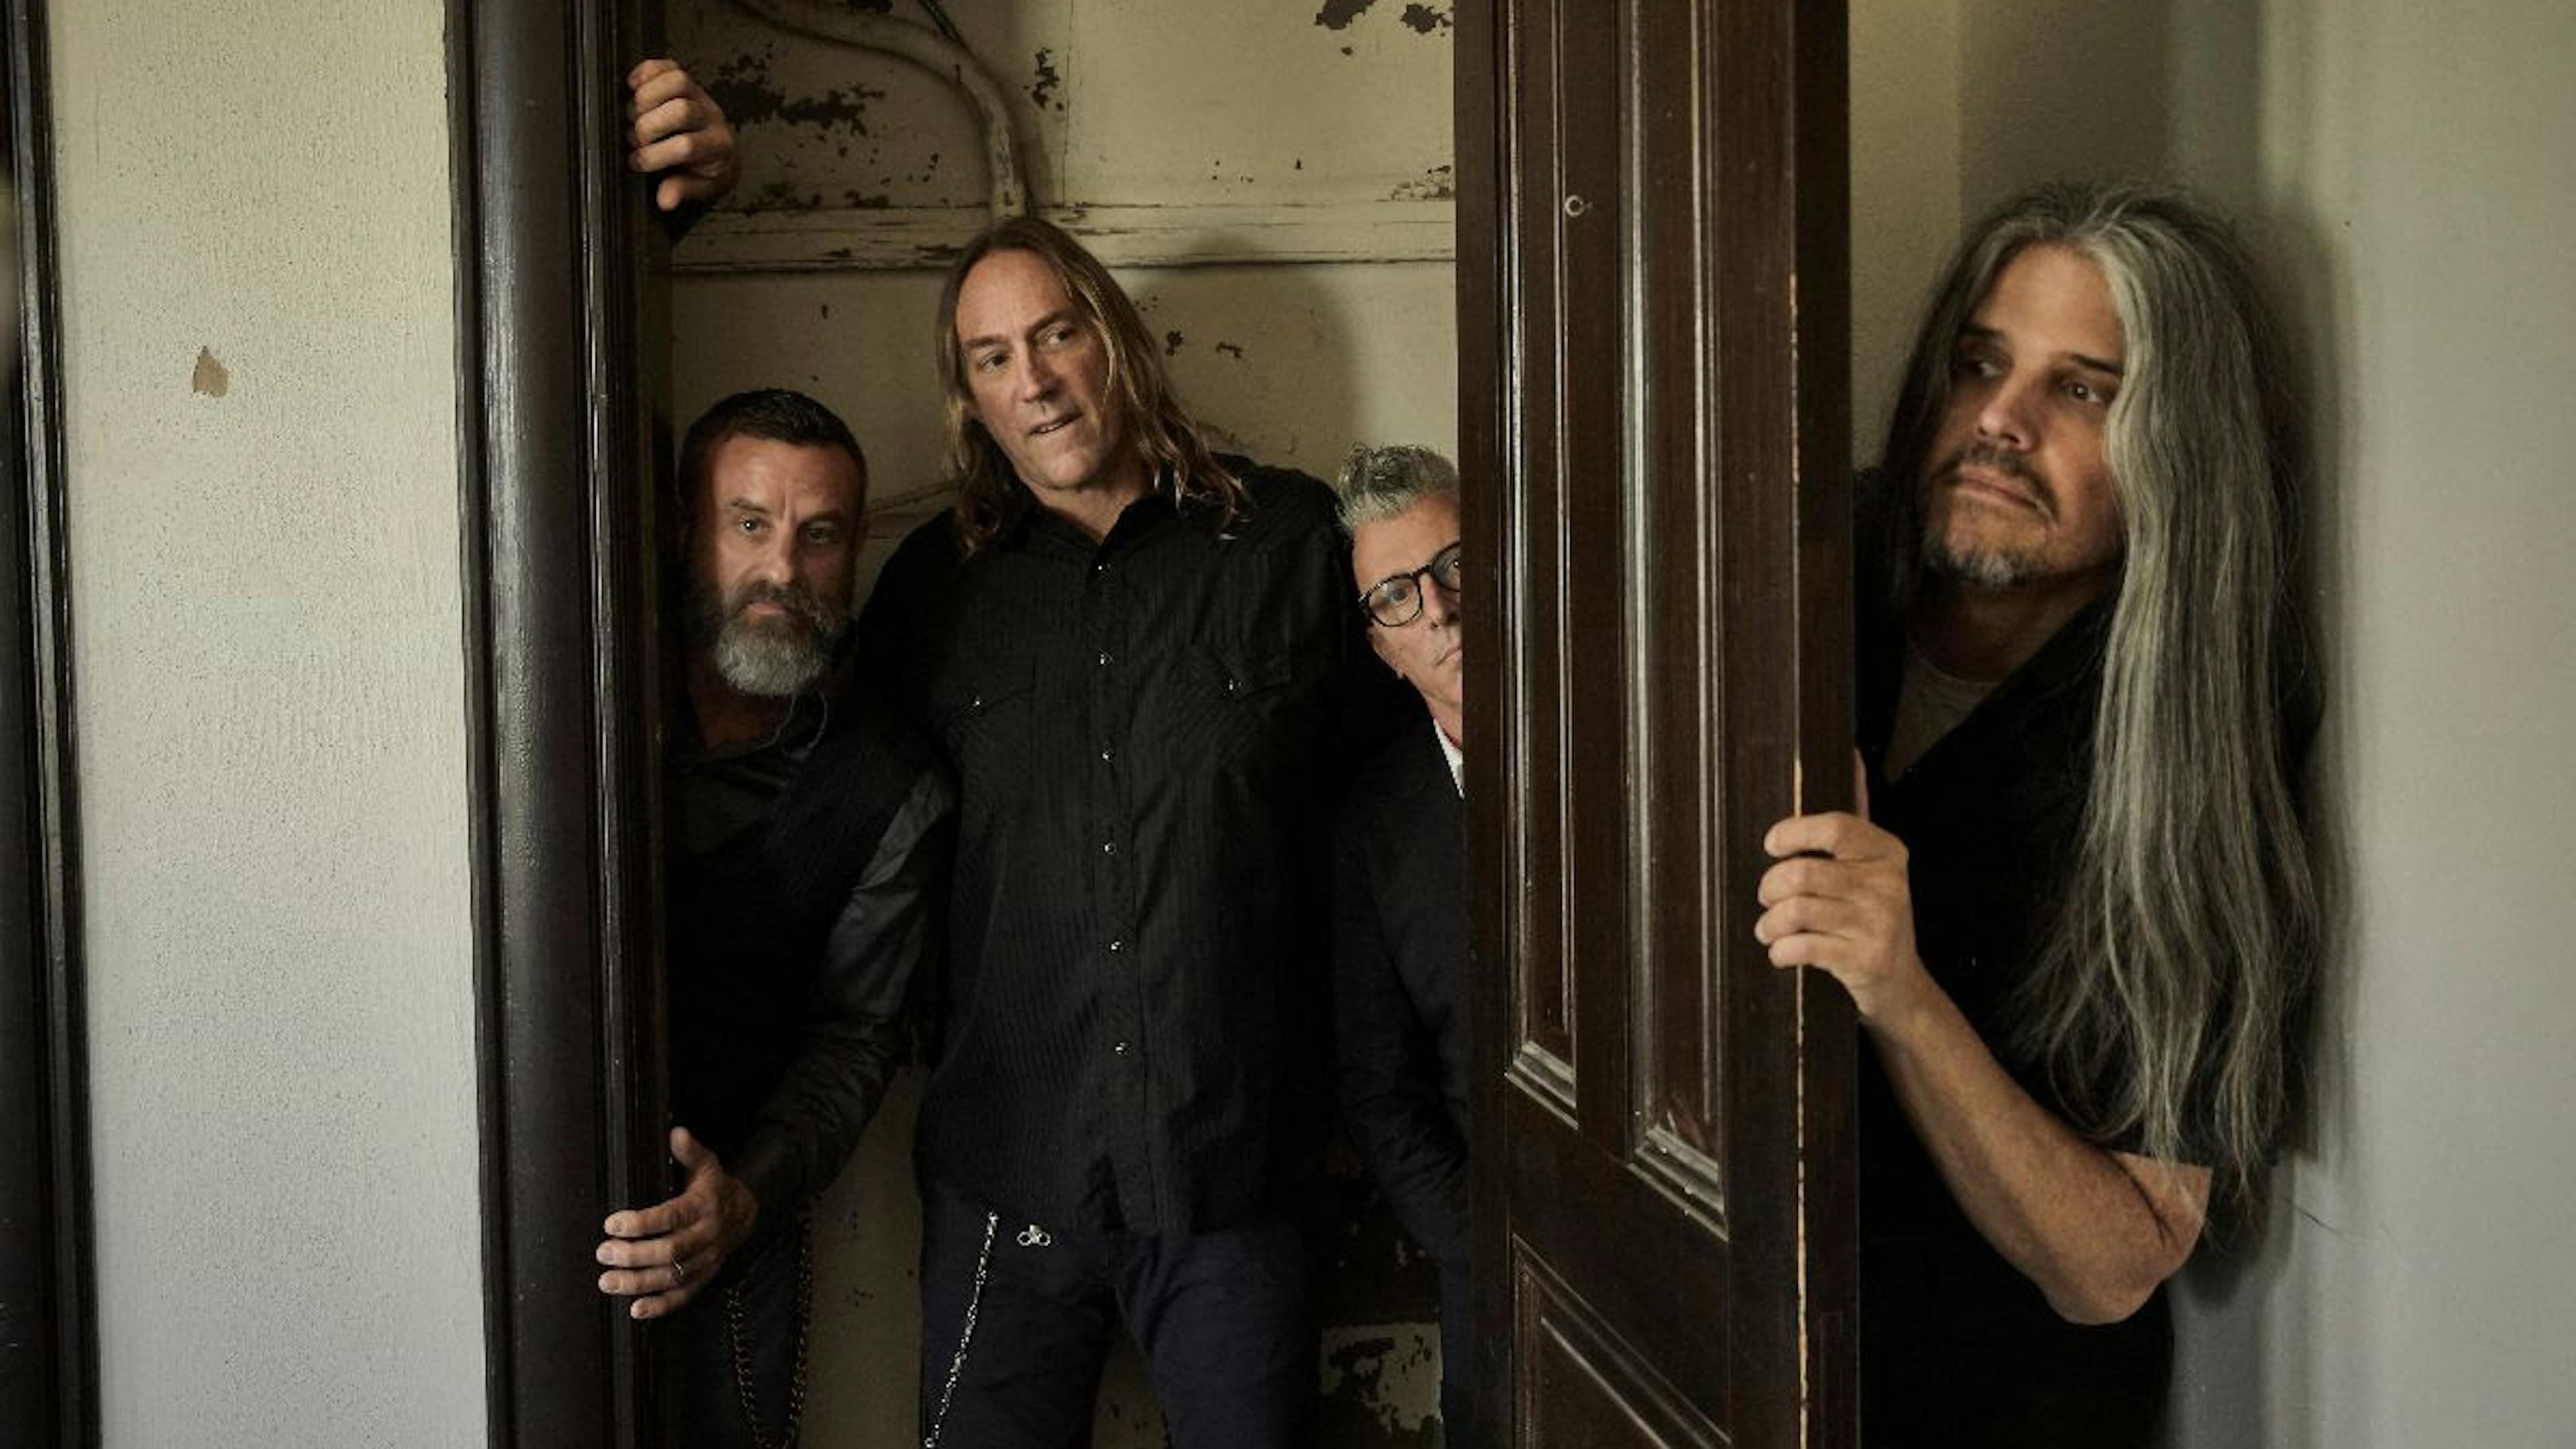 Tool Are The First Band Ever To Have Songs In All Top 10 Spots On Billboard's Rock Sales Chart